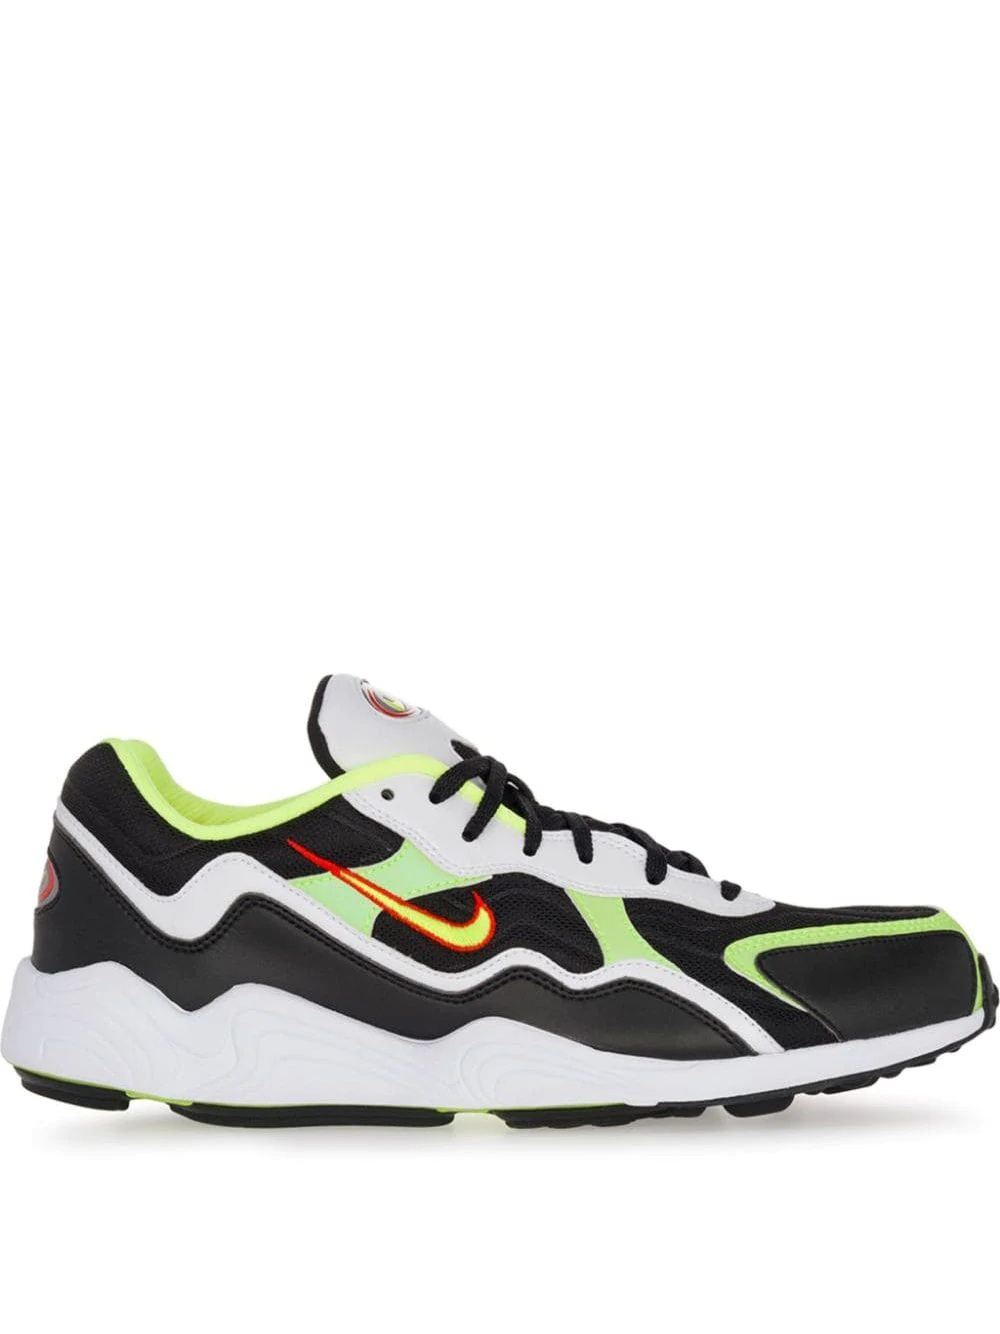 Air Zoom Alpha "Black/Volt/Habanero Red/White" sneakers - 1